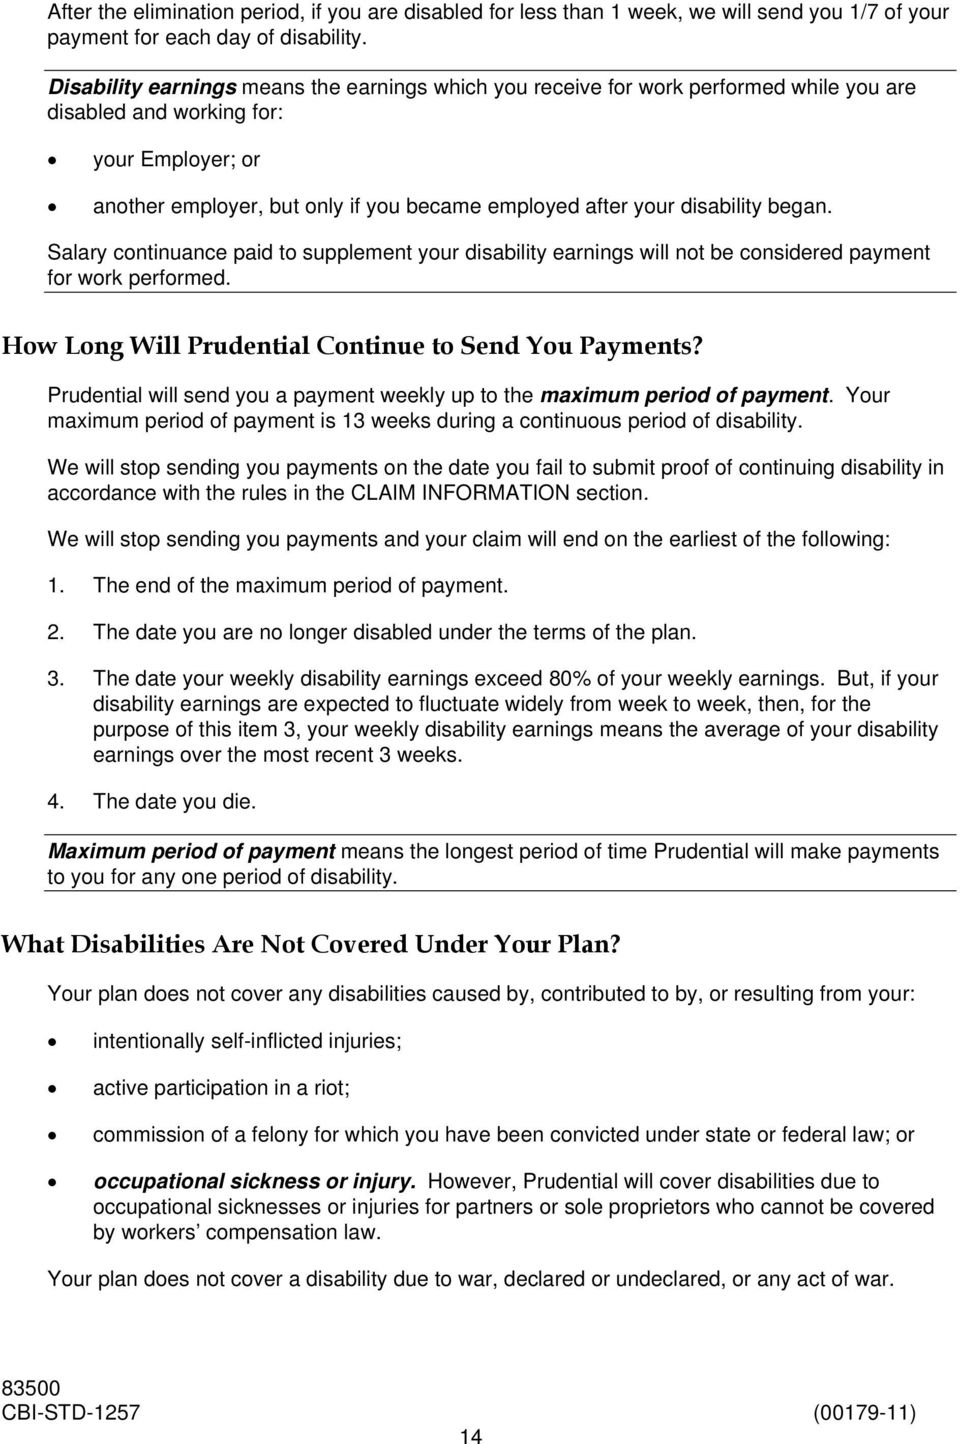 disability began. Salary continuance paid to supplement your disability earnings will not be considered payment for work performed. How Long Will Prudential Continue to Send You Payments?